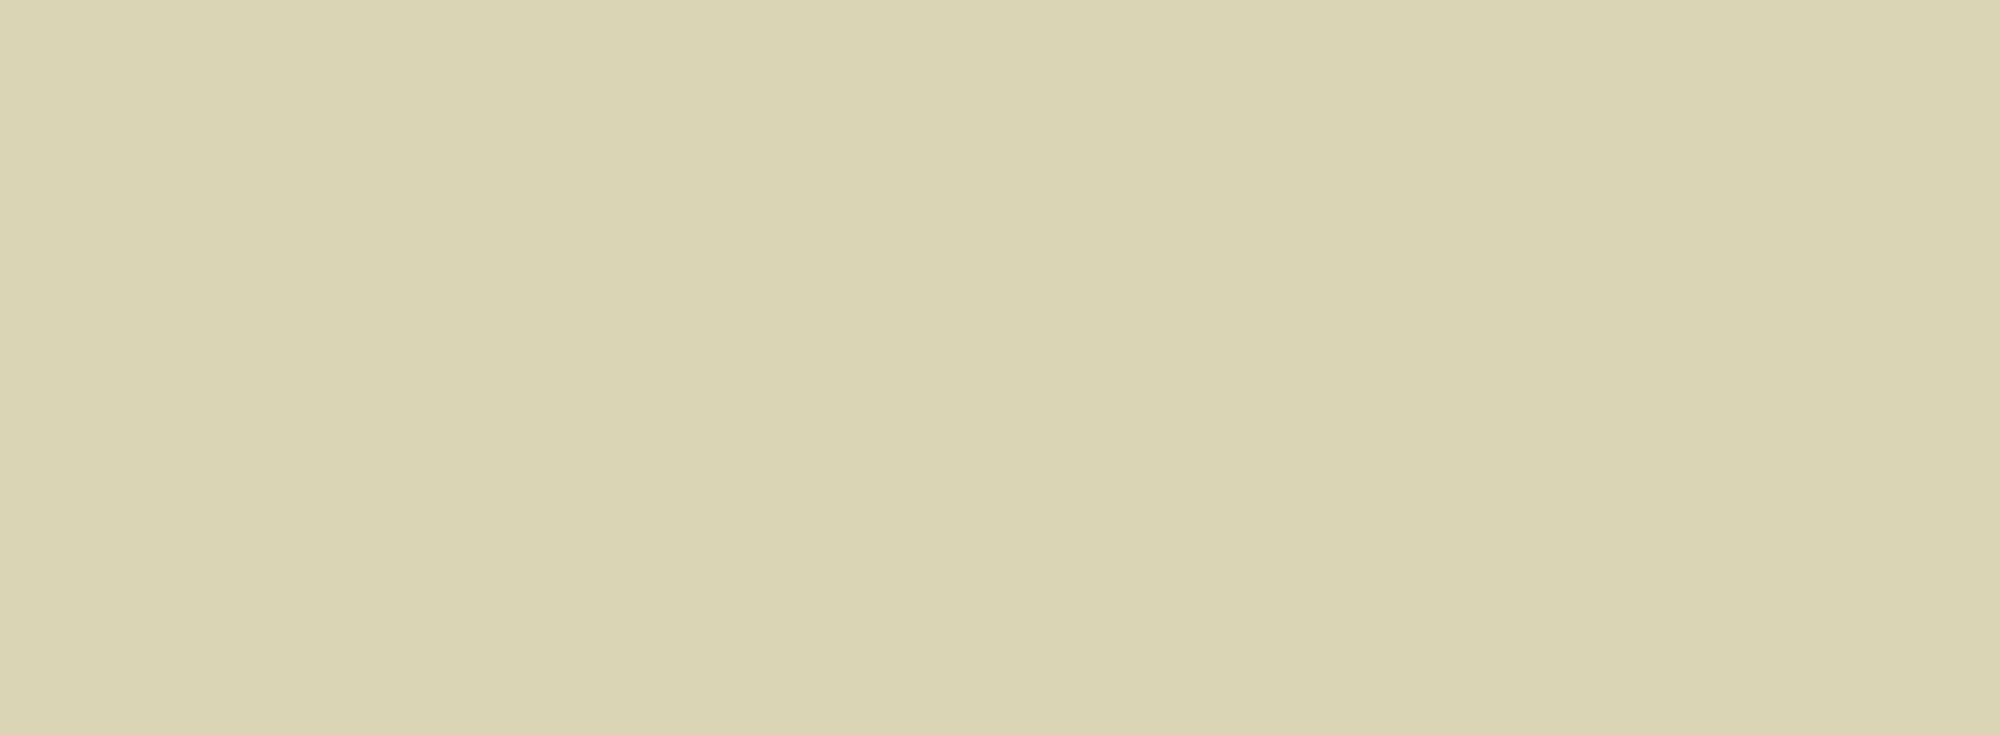 Solid color background in pale khaki